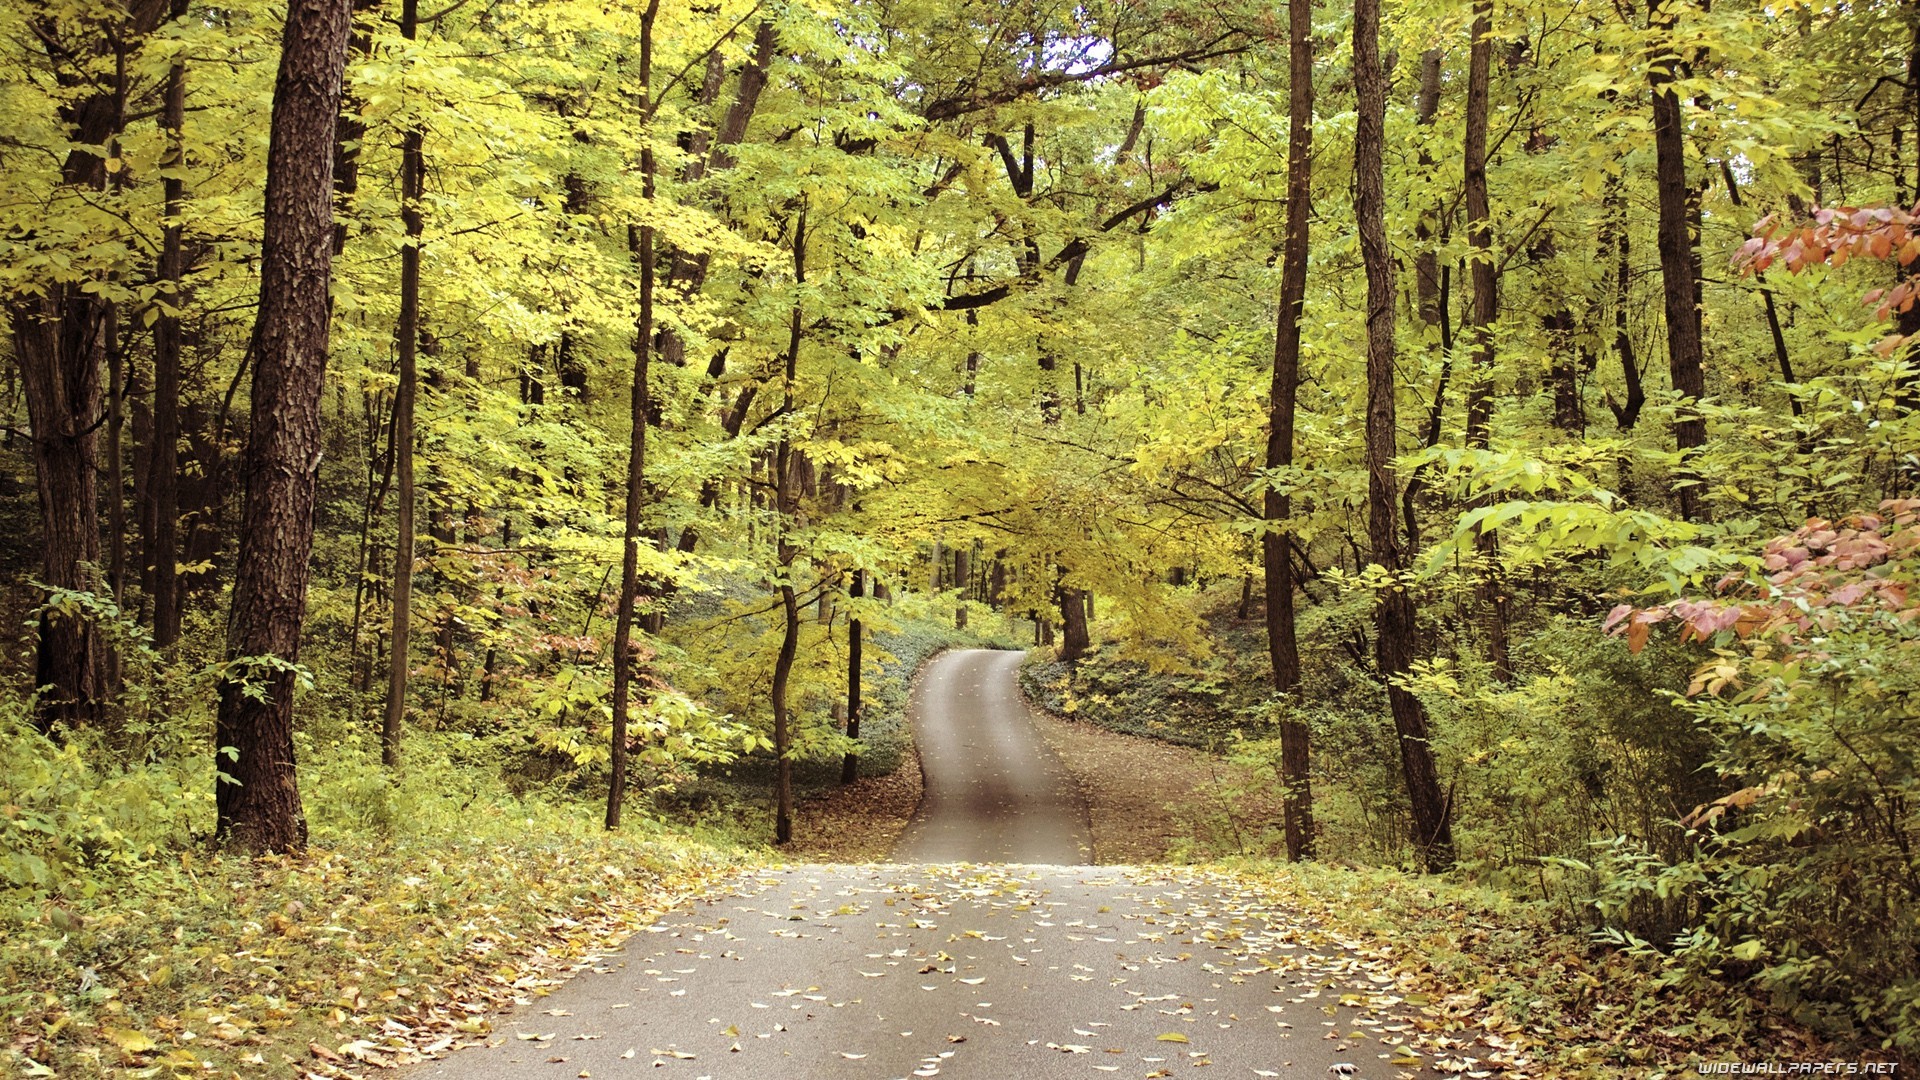 General 1920x1080 forest road trees plants fallen leaves fall dirt road outdoors leaves